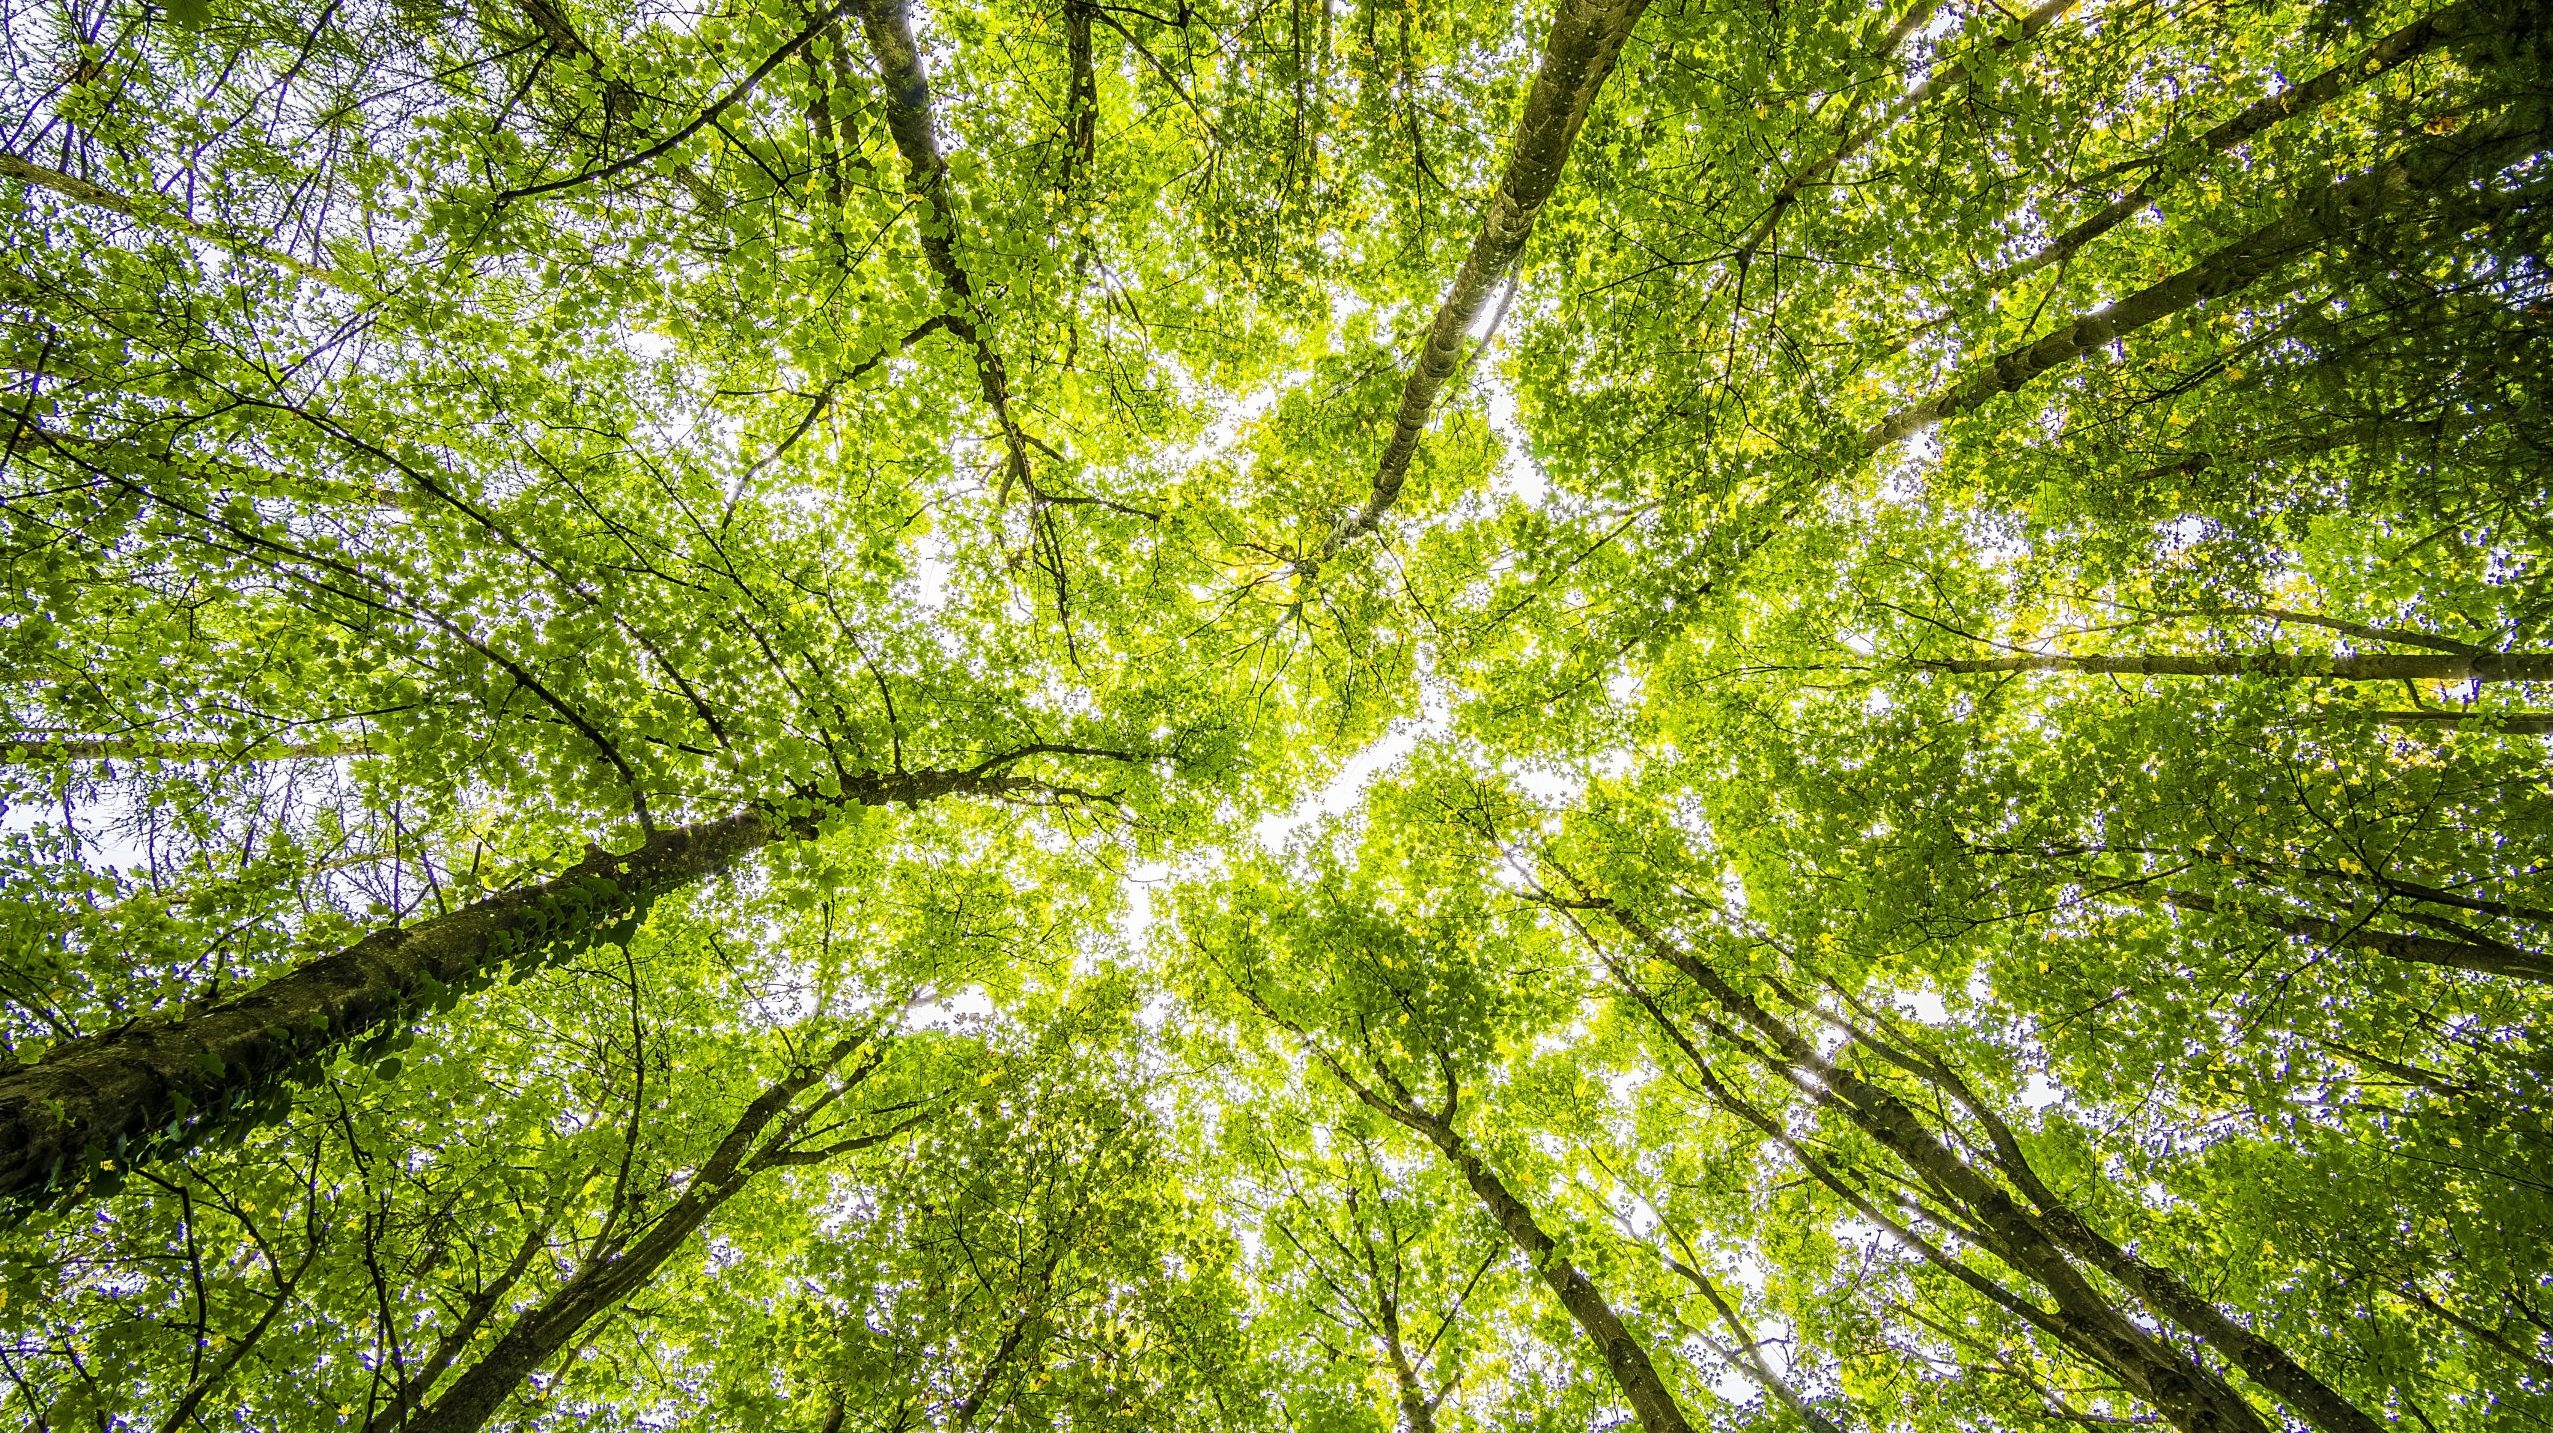 An upward view of a canopy of trees.